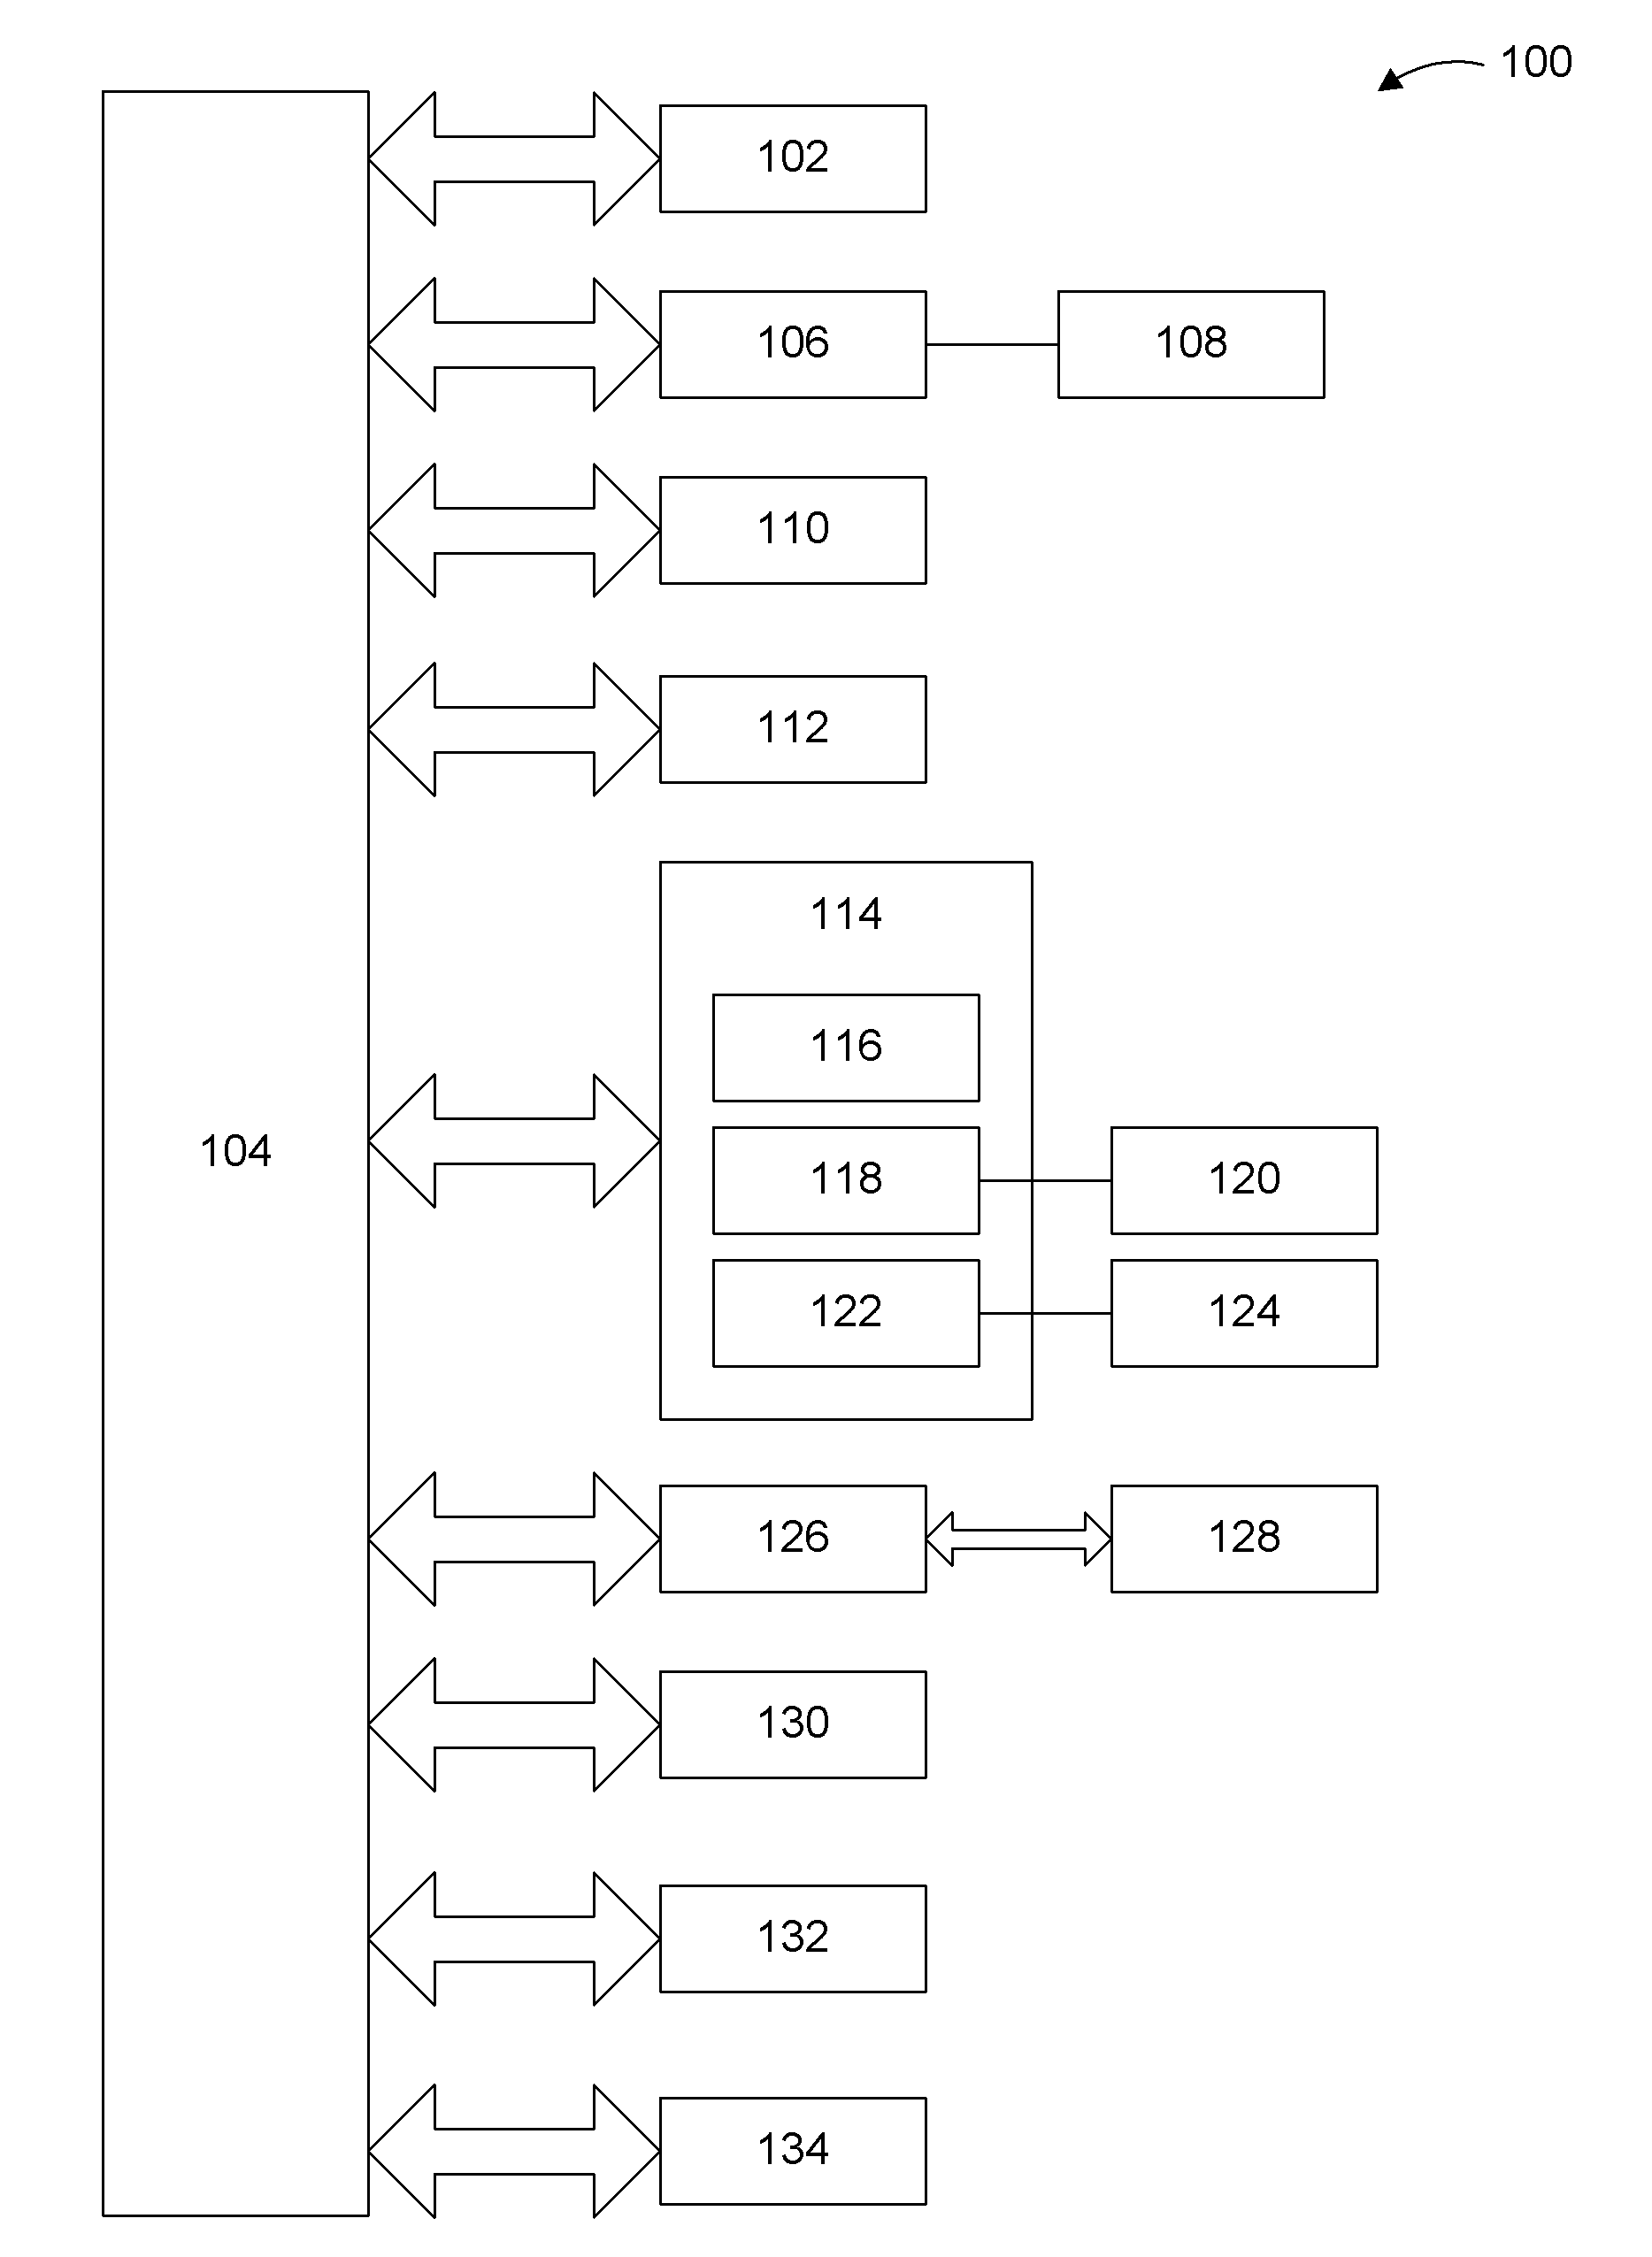 Systems, methods, apparatuses, and computer-readable storage media for designing and manufacturing custom dental preparation guides